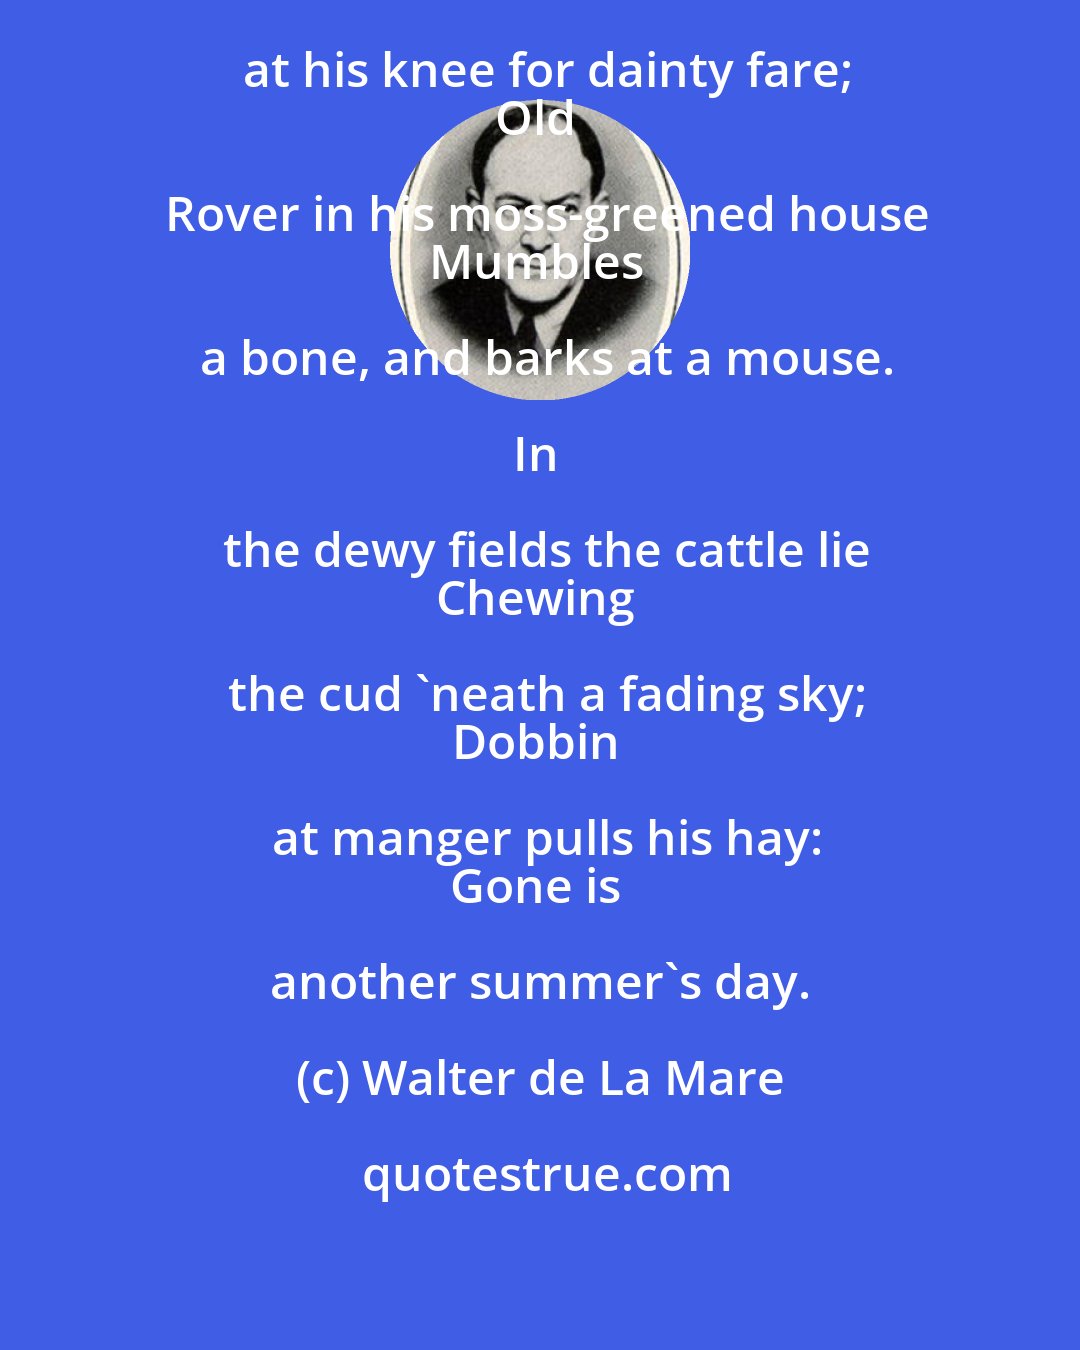 Walter de La Mare: The sandy cat by the Farmer's chair
Mews at his knee for dainty fare;
Old Rover in his moss-greened house
Mumbles a bone, and barks at a mouse.

In the dewy fields the cattle lie
Chewing the cud 'neath a fading sky;
Dobbin at manger pulls his hay:
Gone is another summer's day.